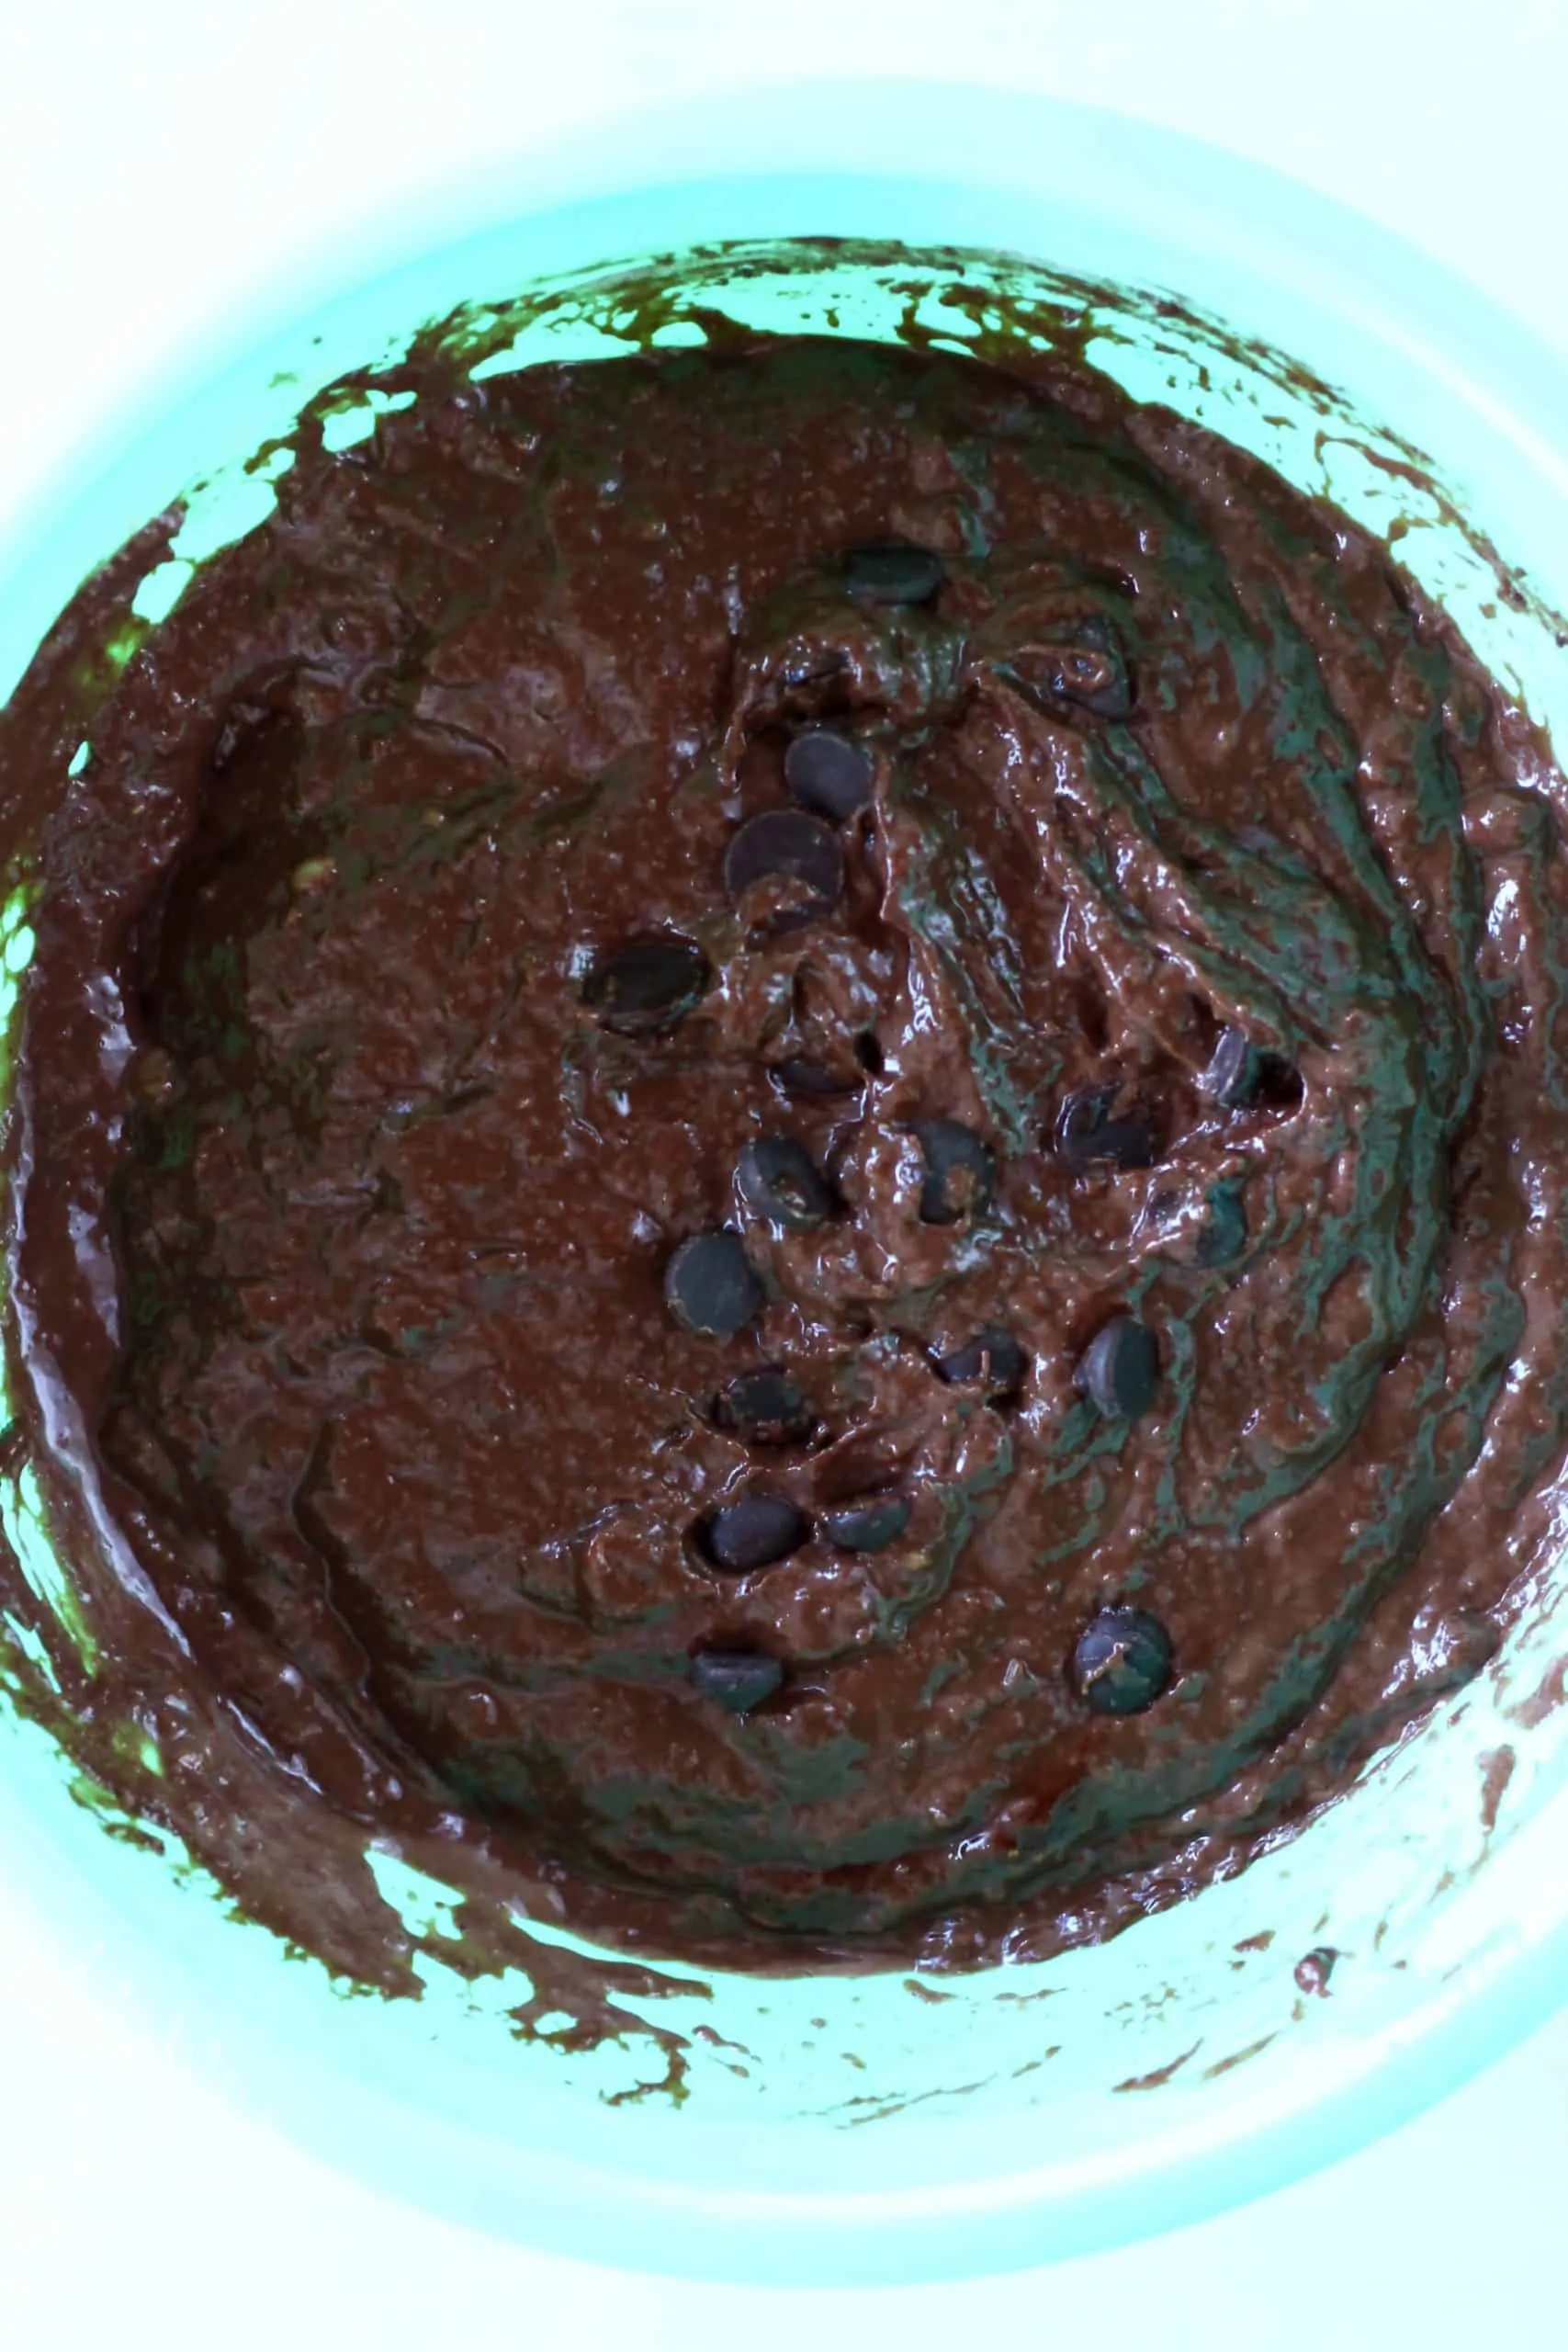 Raw gluten-free vegan chocolate muffin batter with chocolate chips in a mixing bowl